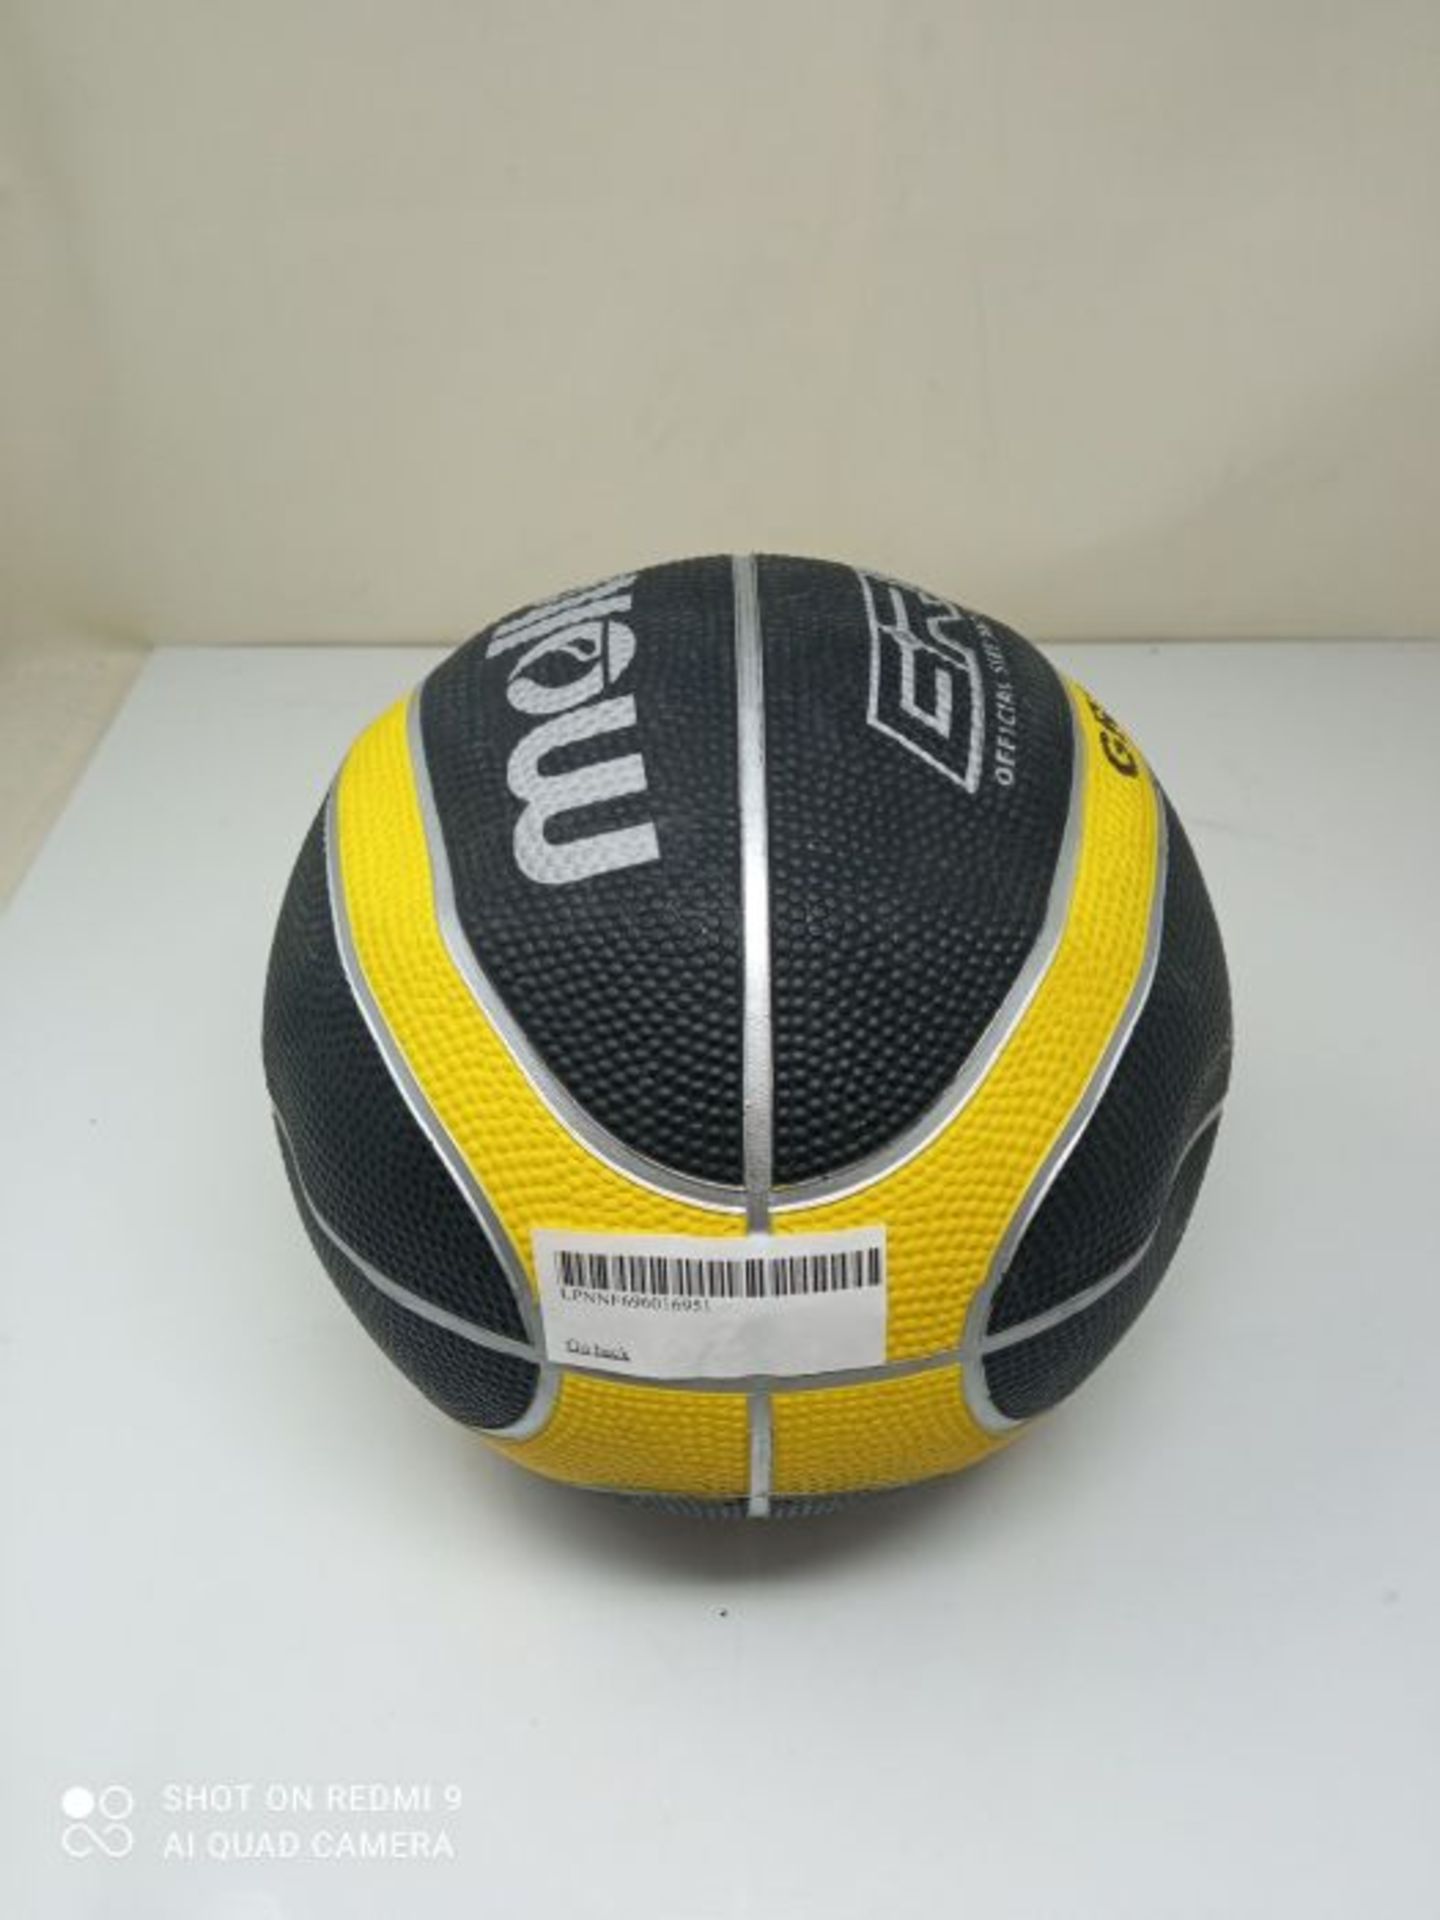 Molten GR Basketball, Indoor/Outdoor, Premium Rubber, Size 5, Impact Colour Black/Yell - Image 2 of 2